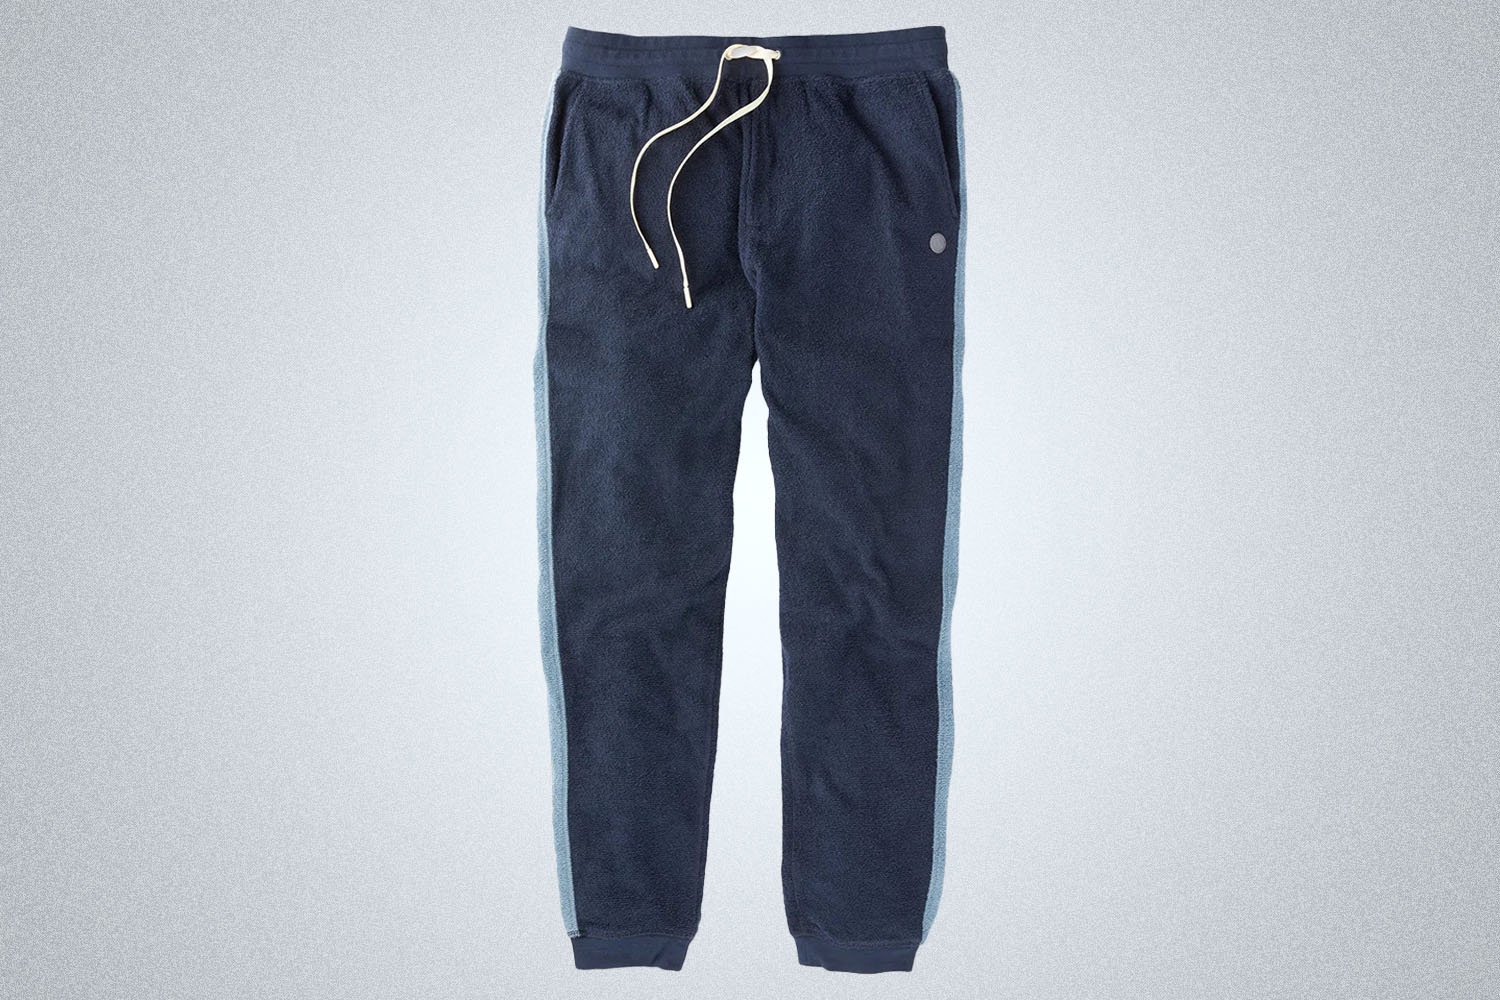 Outerknown Hightide Colorblock Sweatpants